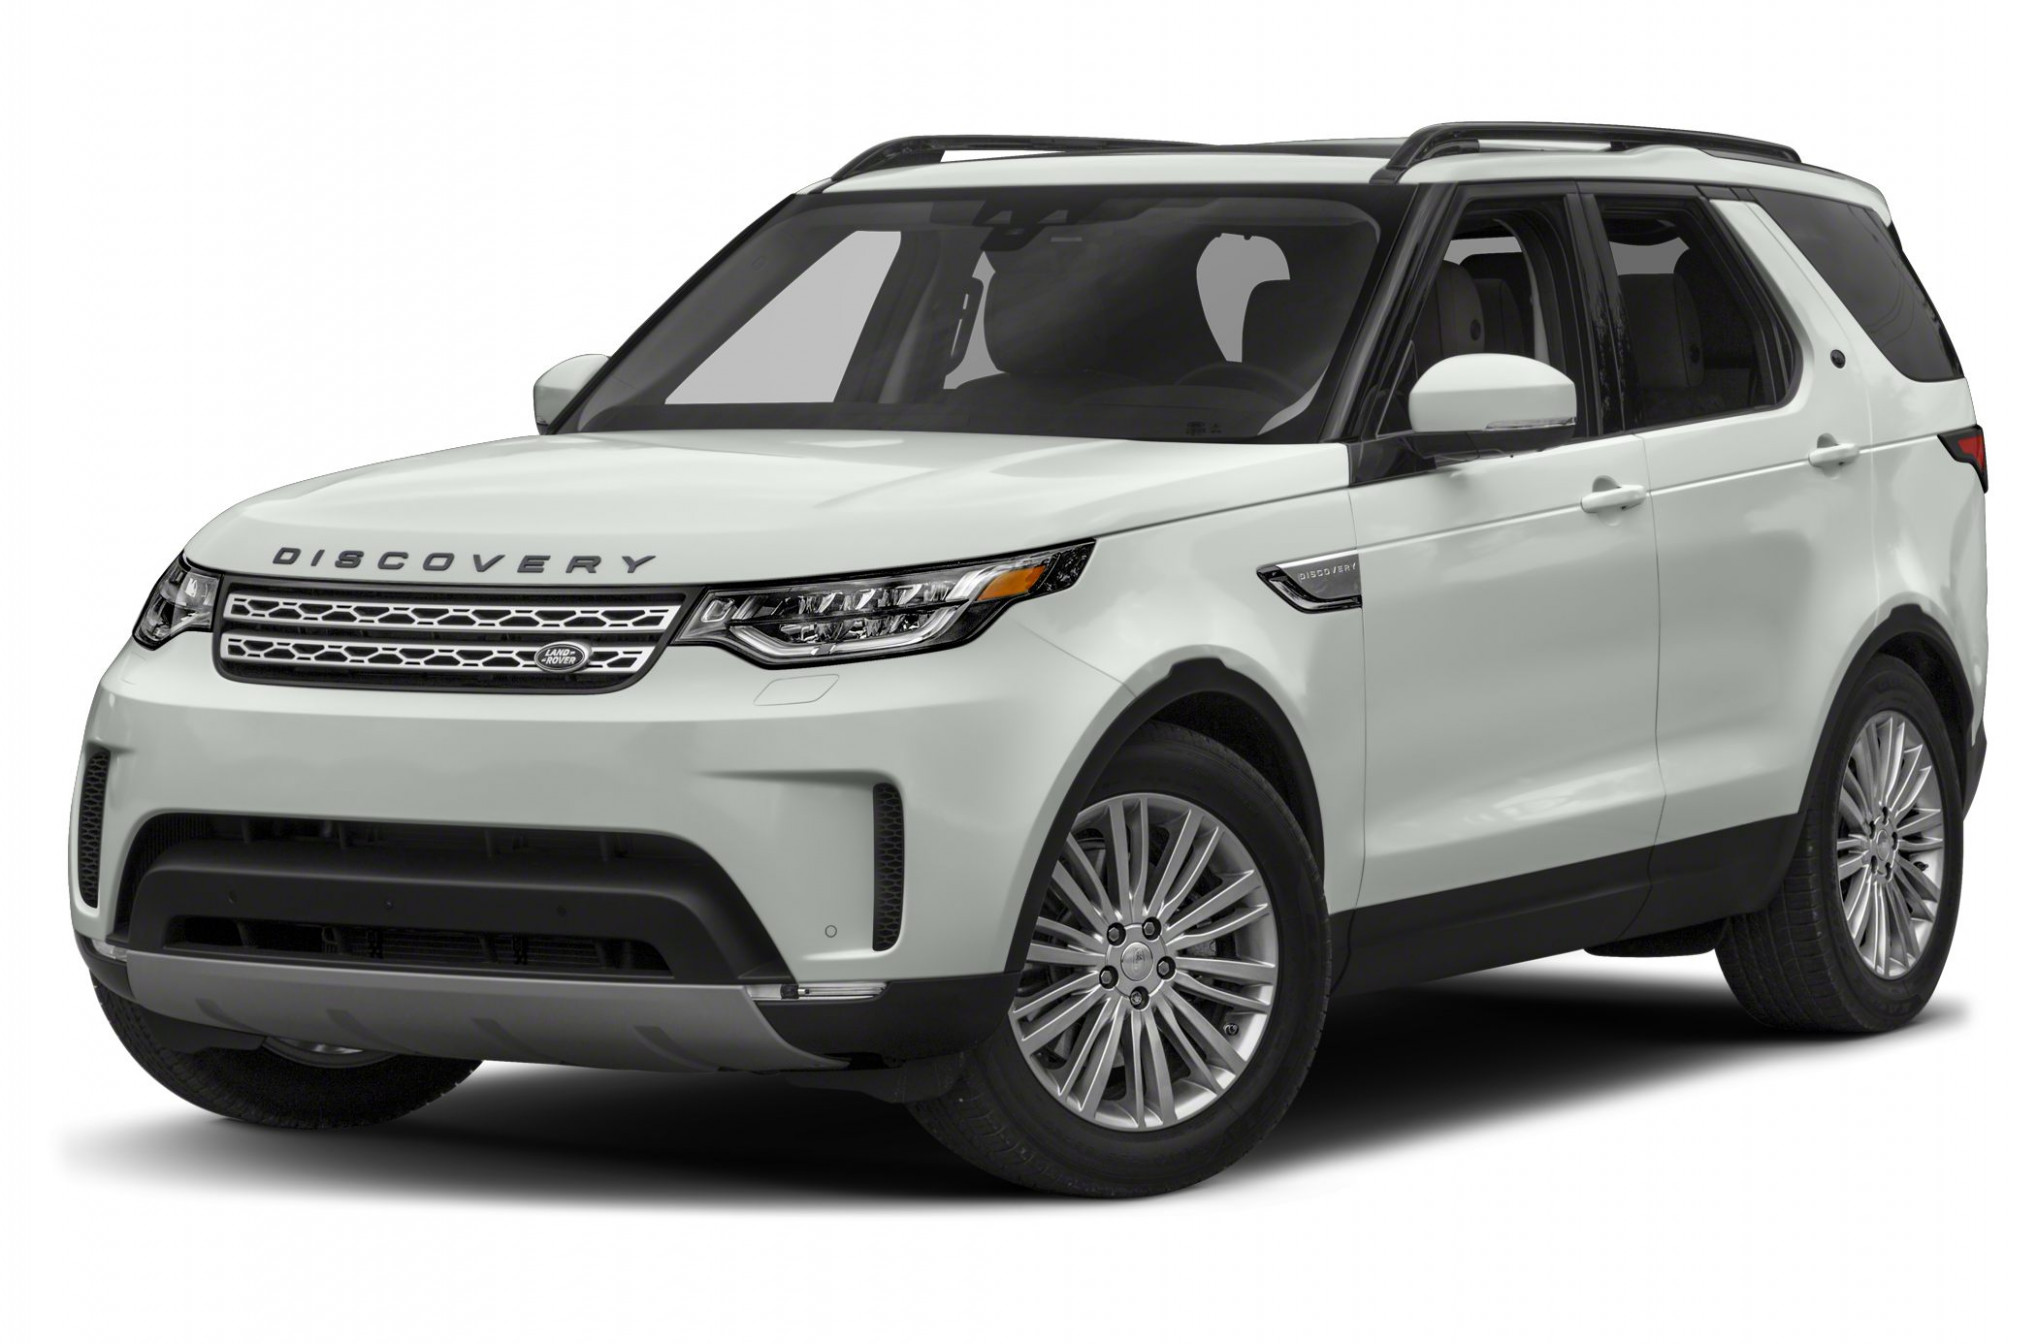 5 Land Rover Discovery HSE 5dr 5x5 Specs and Prices - land rover discovery specs